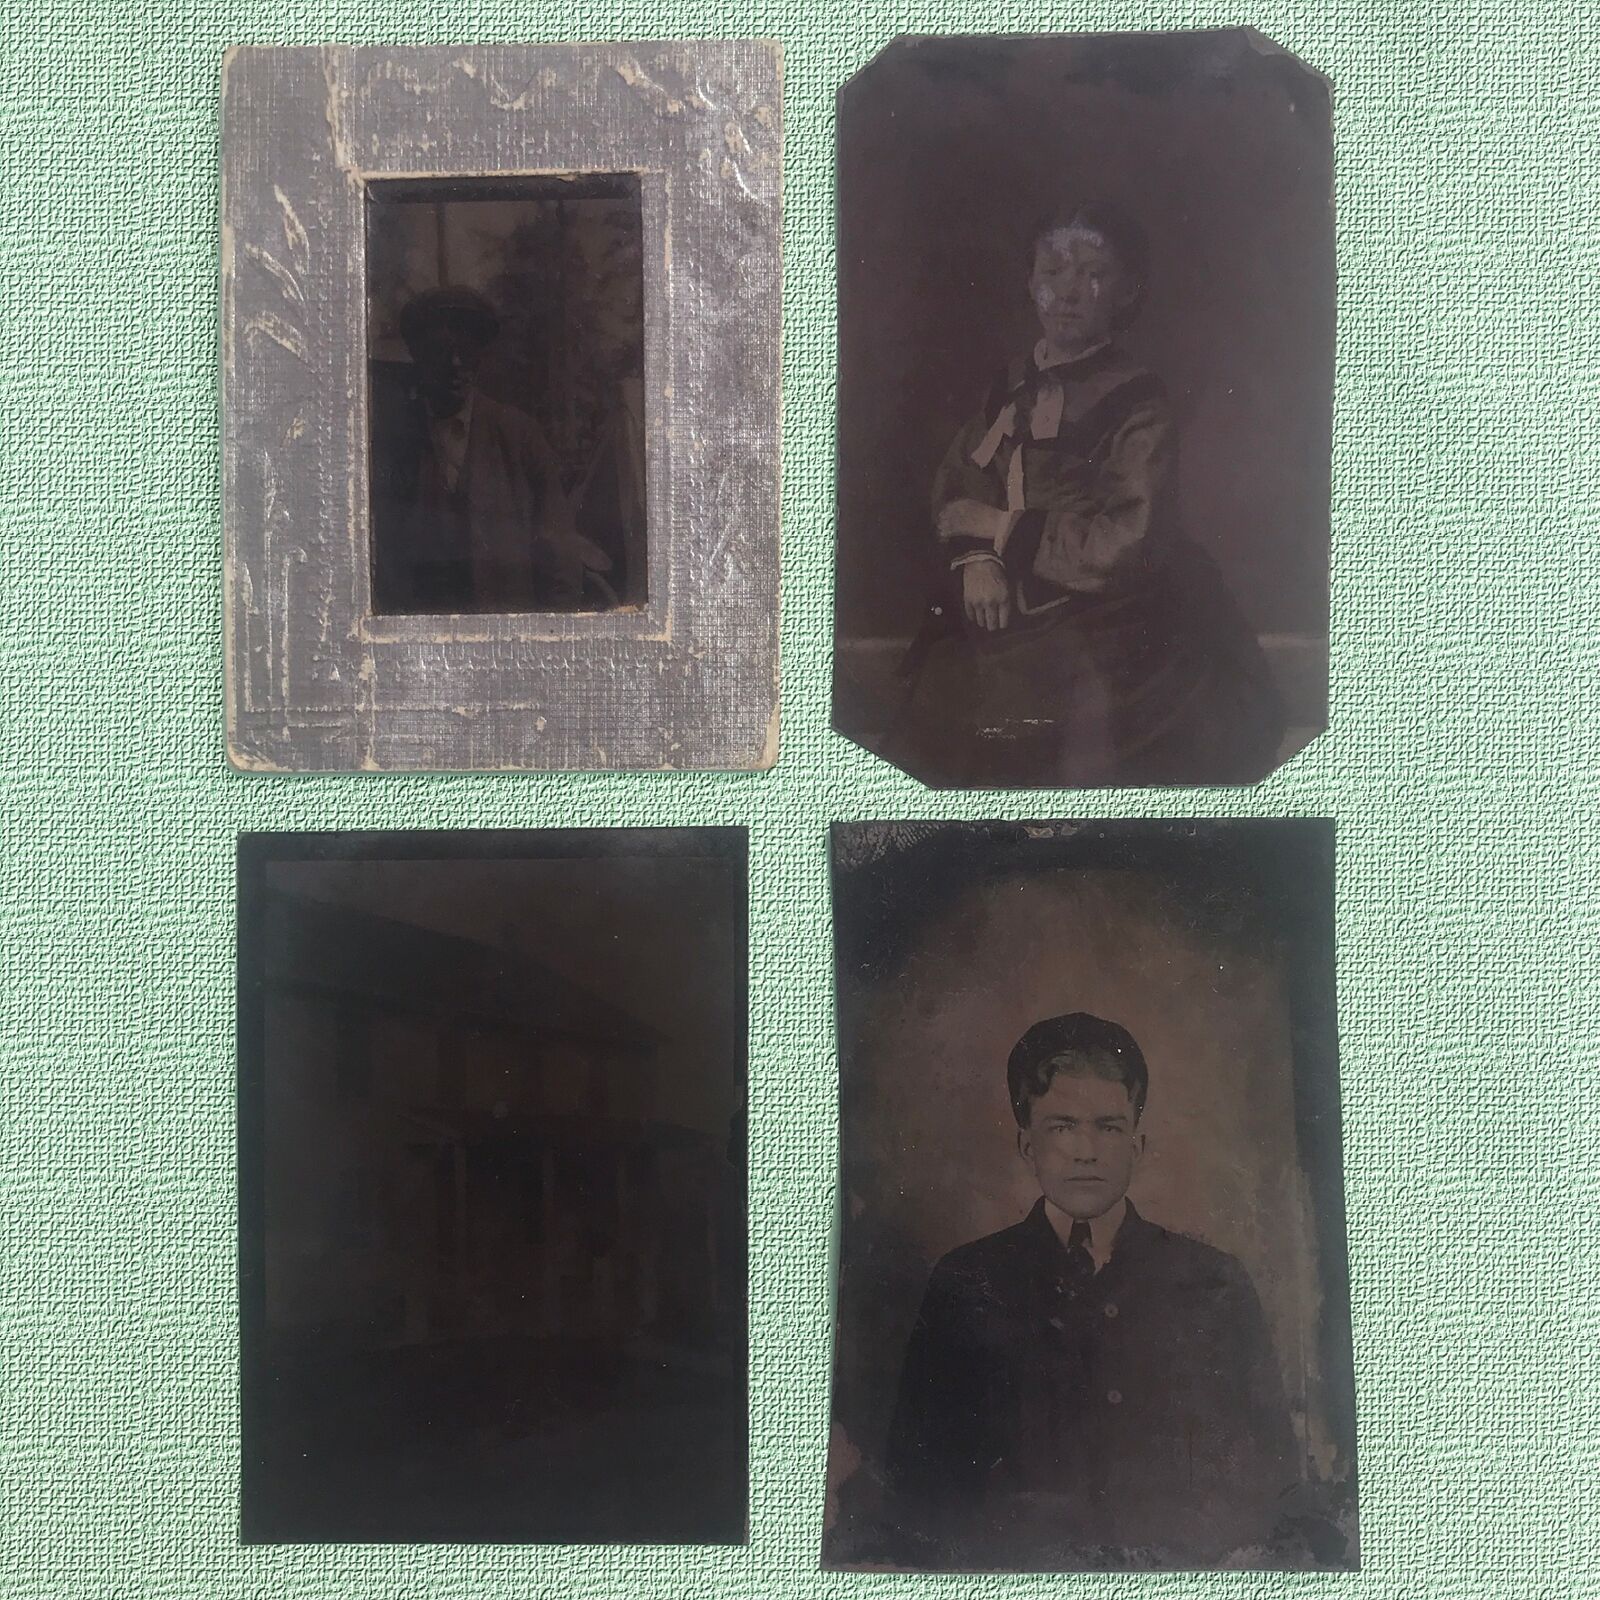 FOUR (4) ASSORTED ANTIQUE TINTYPE PHOTOS, with WOMEN, MEN, BUILDING 1860s-1920s